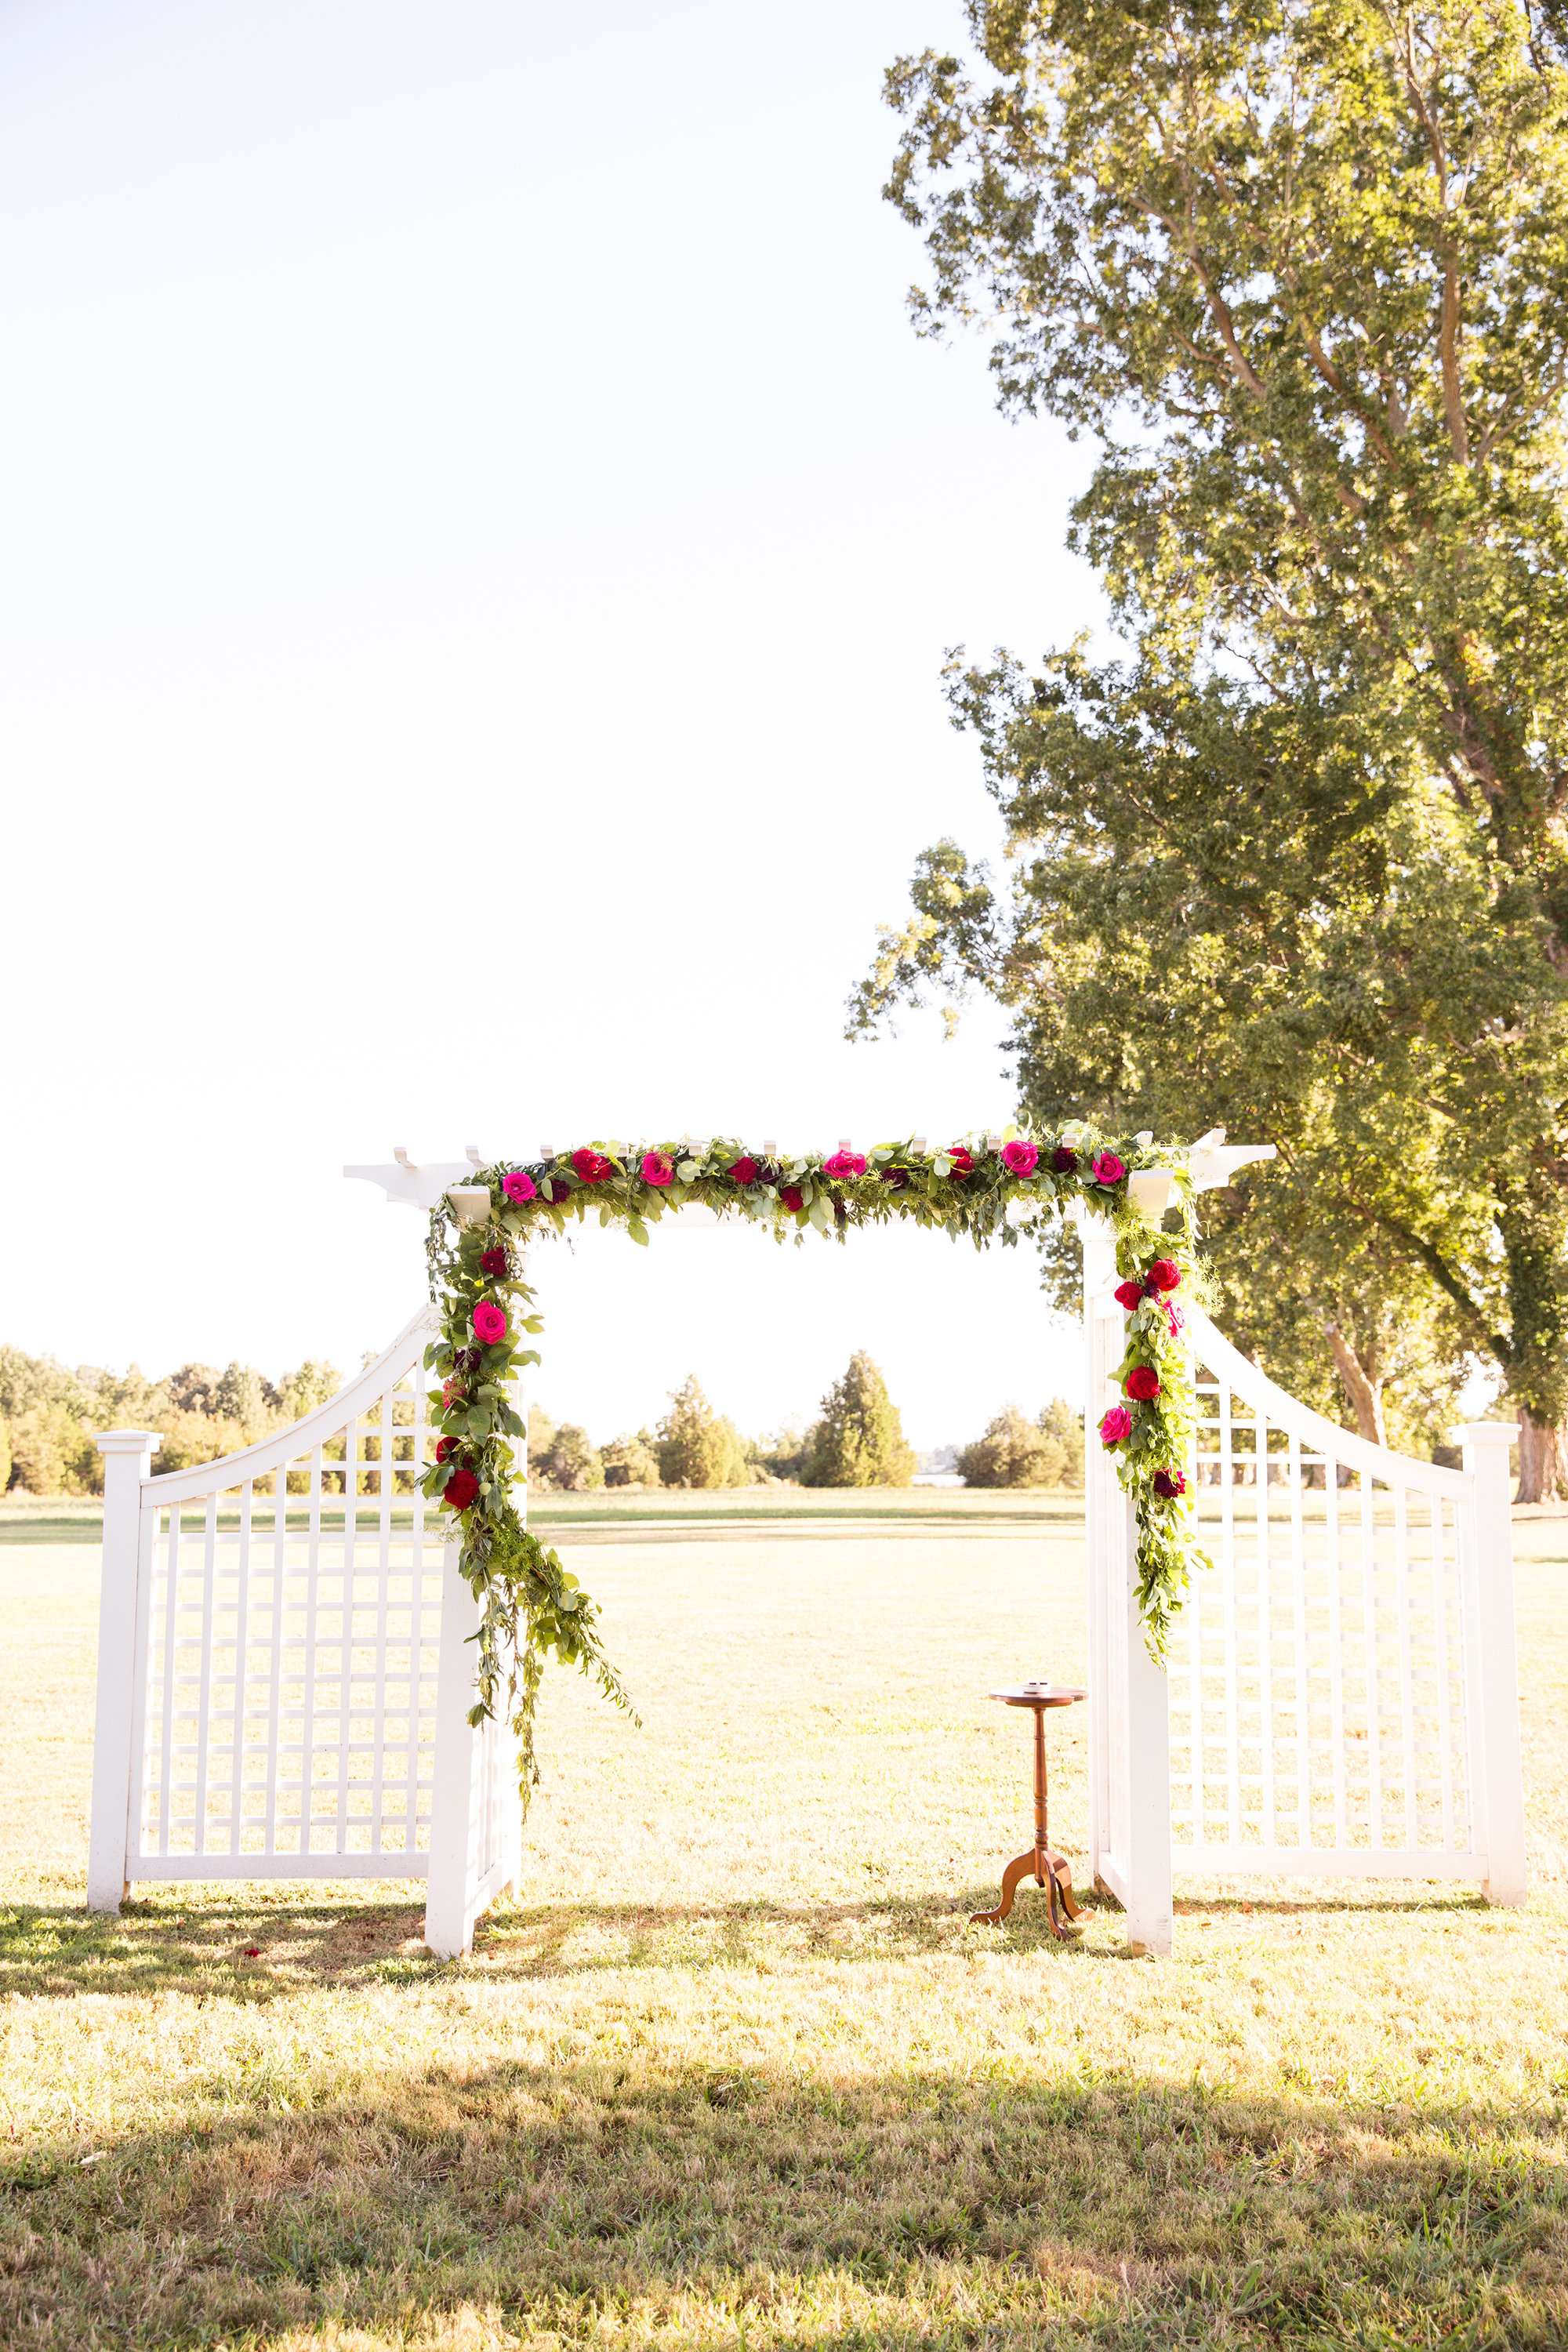 How to Plan a Blog Worthy Wedding on a Budget - Image Property of www.j-dphoto.com